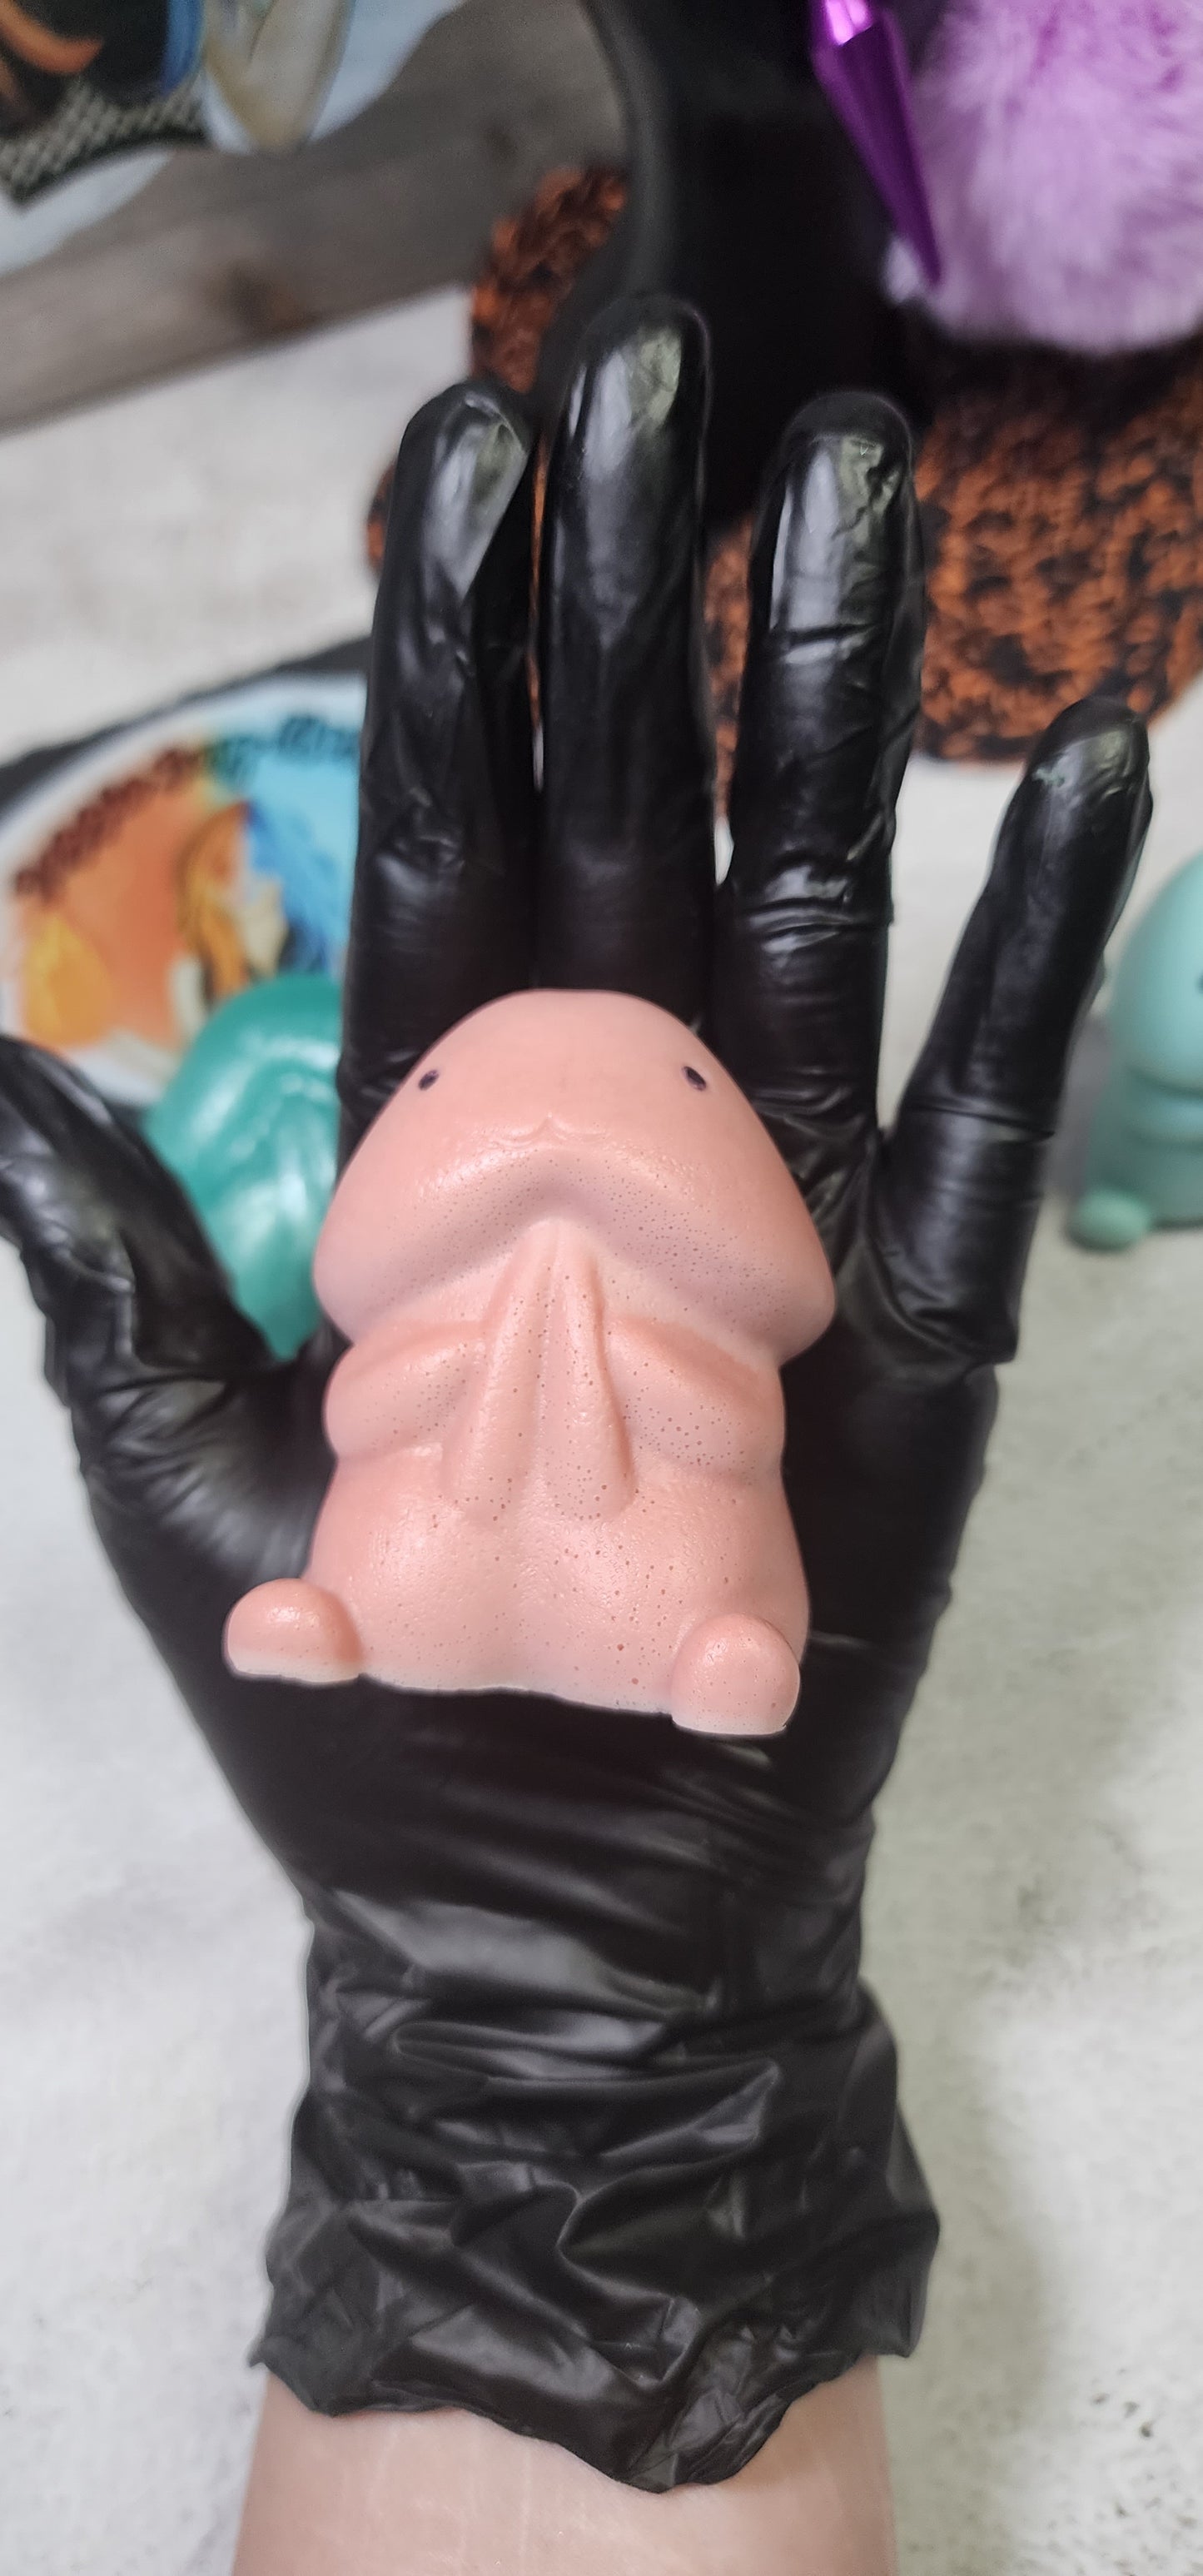 Small Cute Peen Shaped Soap with face | Bachelorette Party, Gag Gift, NSFW, Baby Shower | Adult Novelty